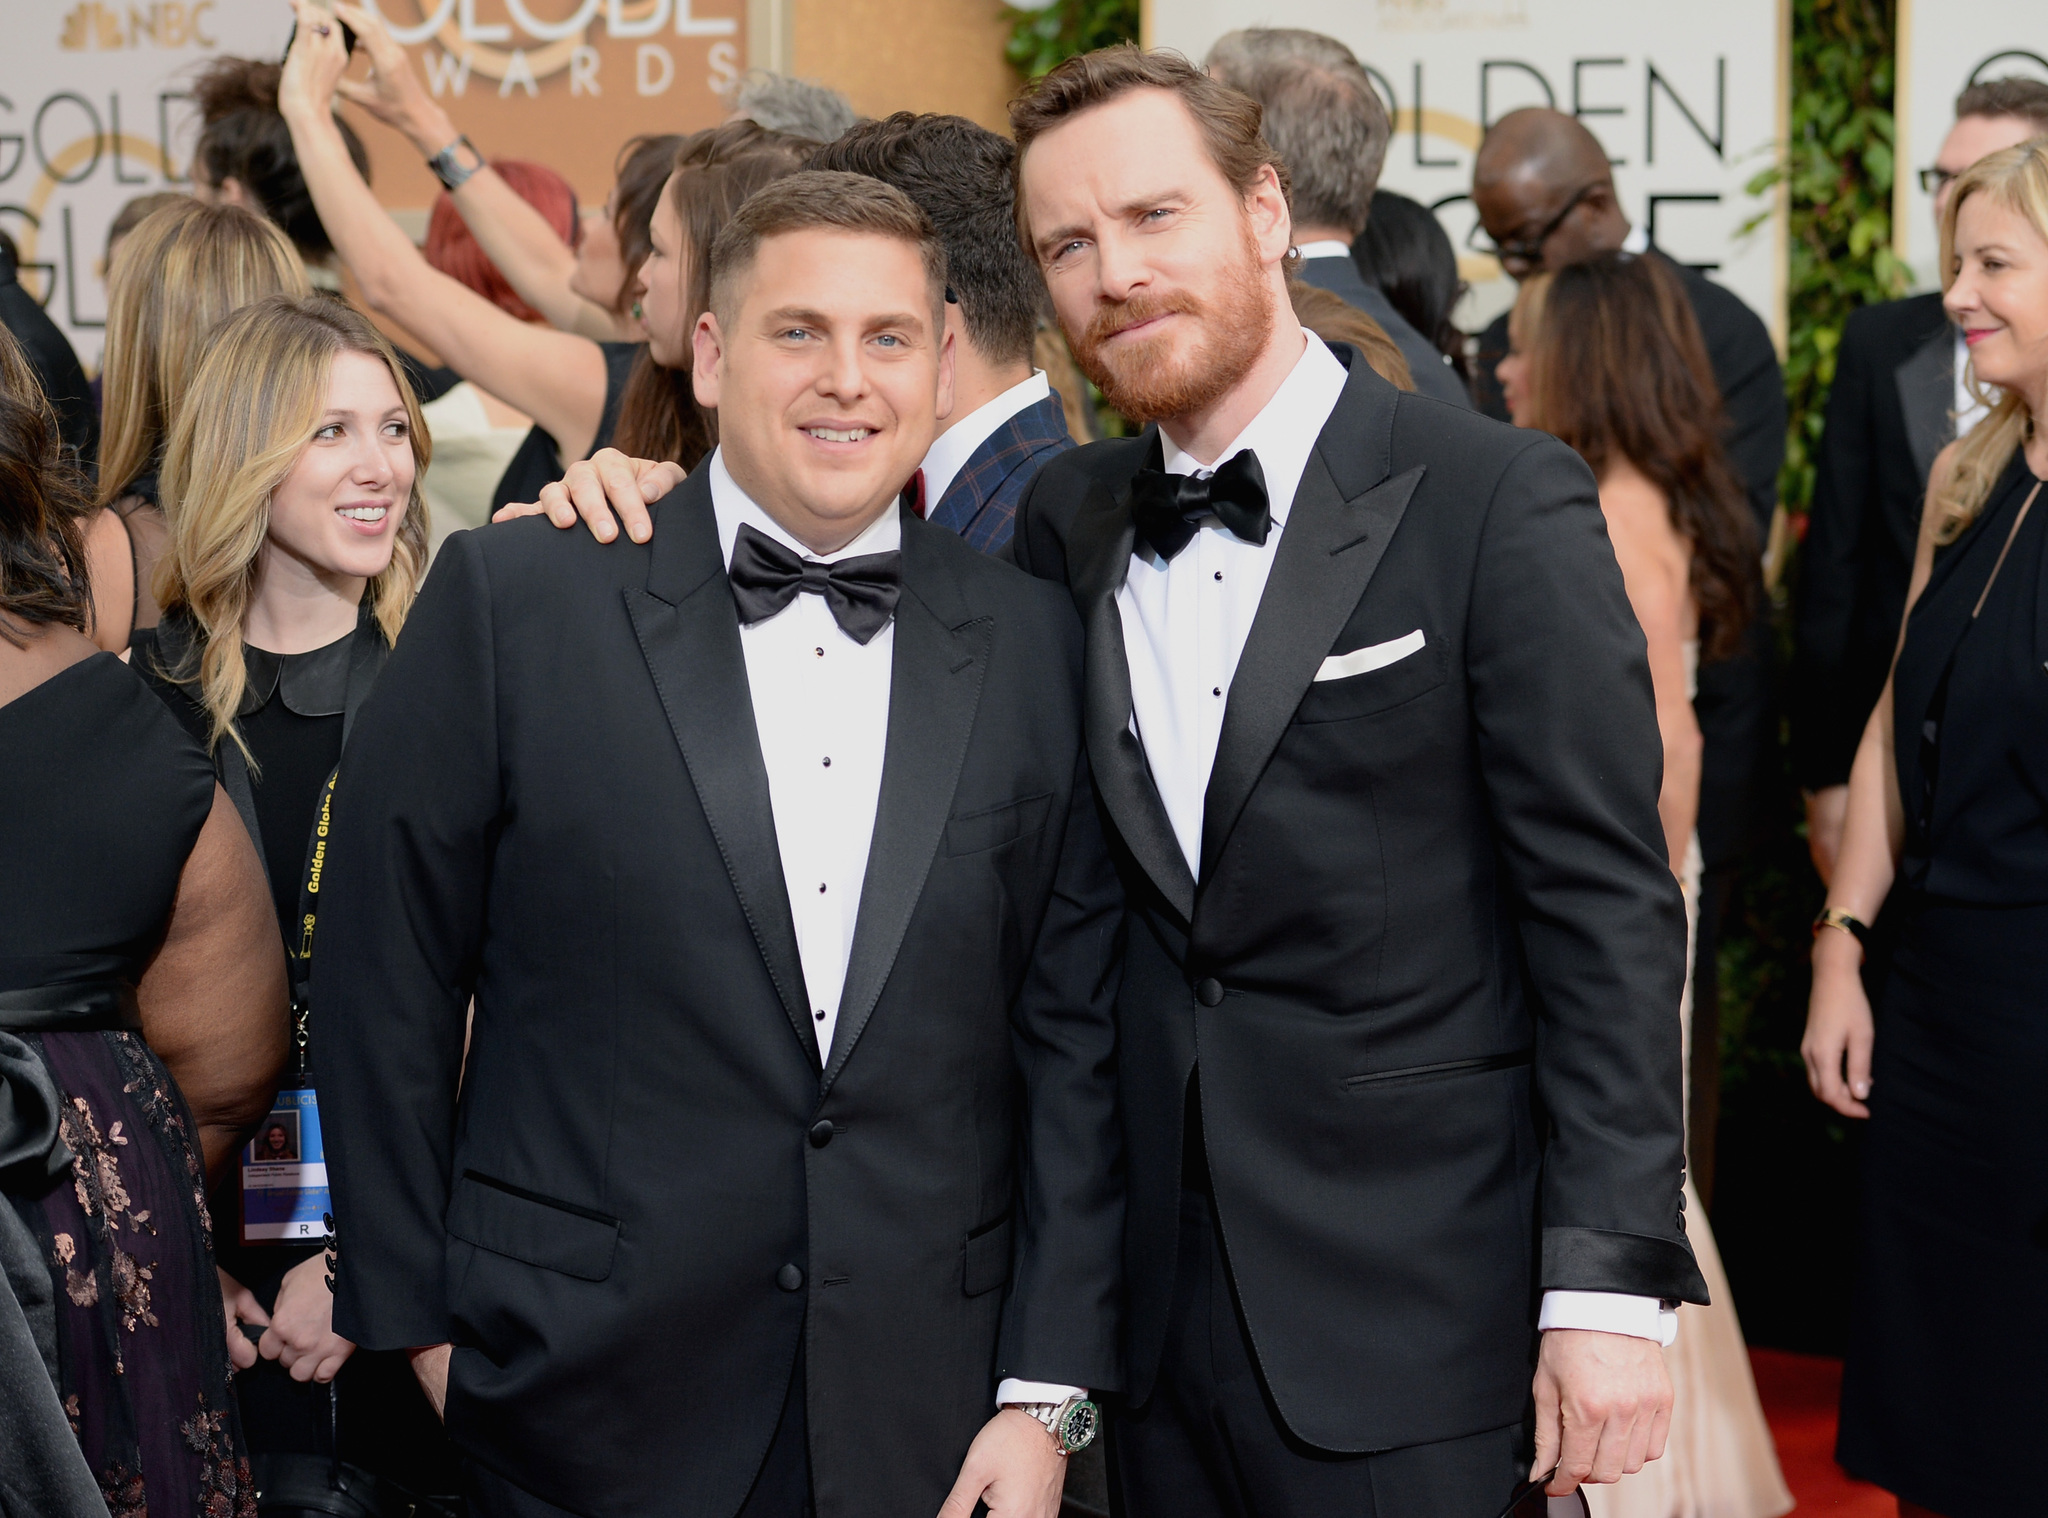 Michael Fassbender and Jonah Hill